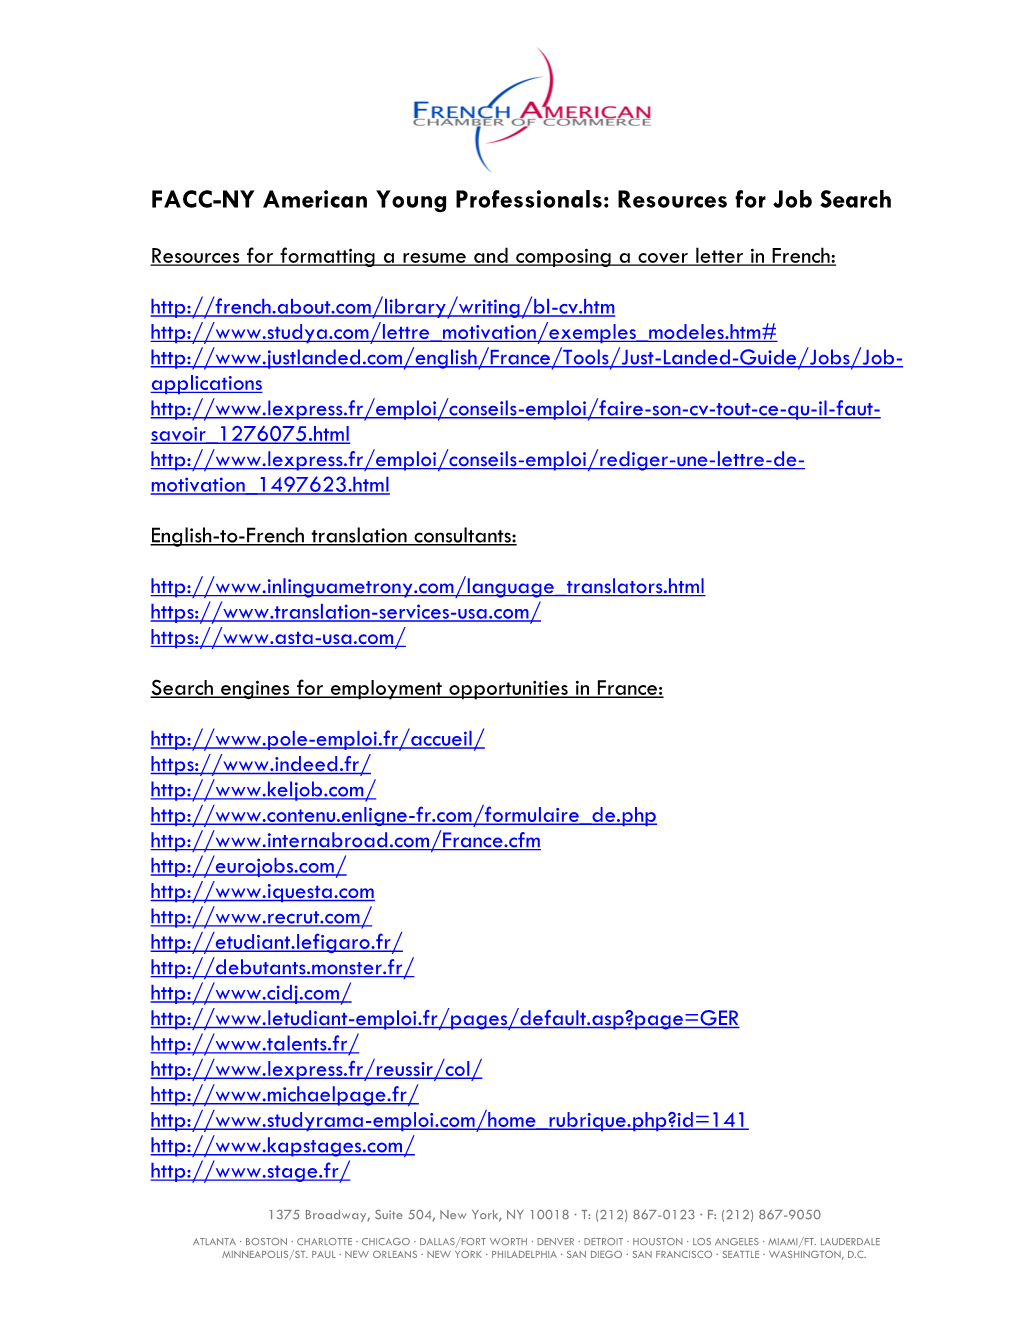 FACC-NY American Young Professionals: Resources for Job Search